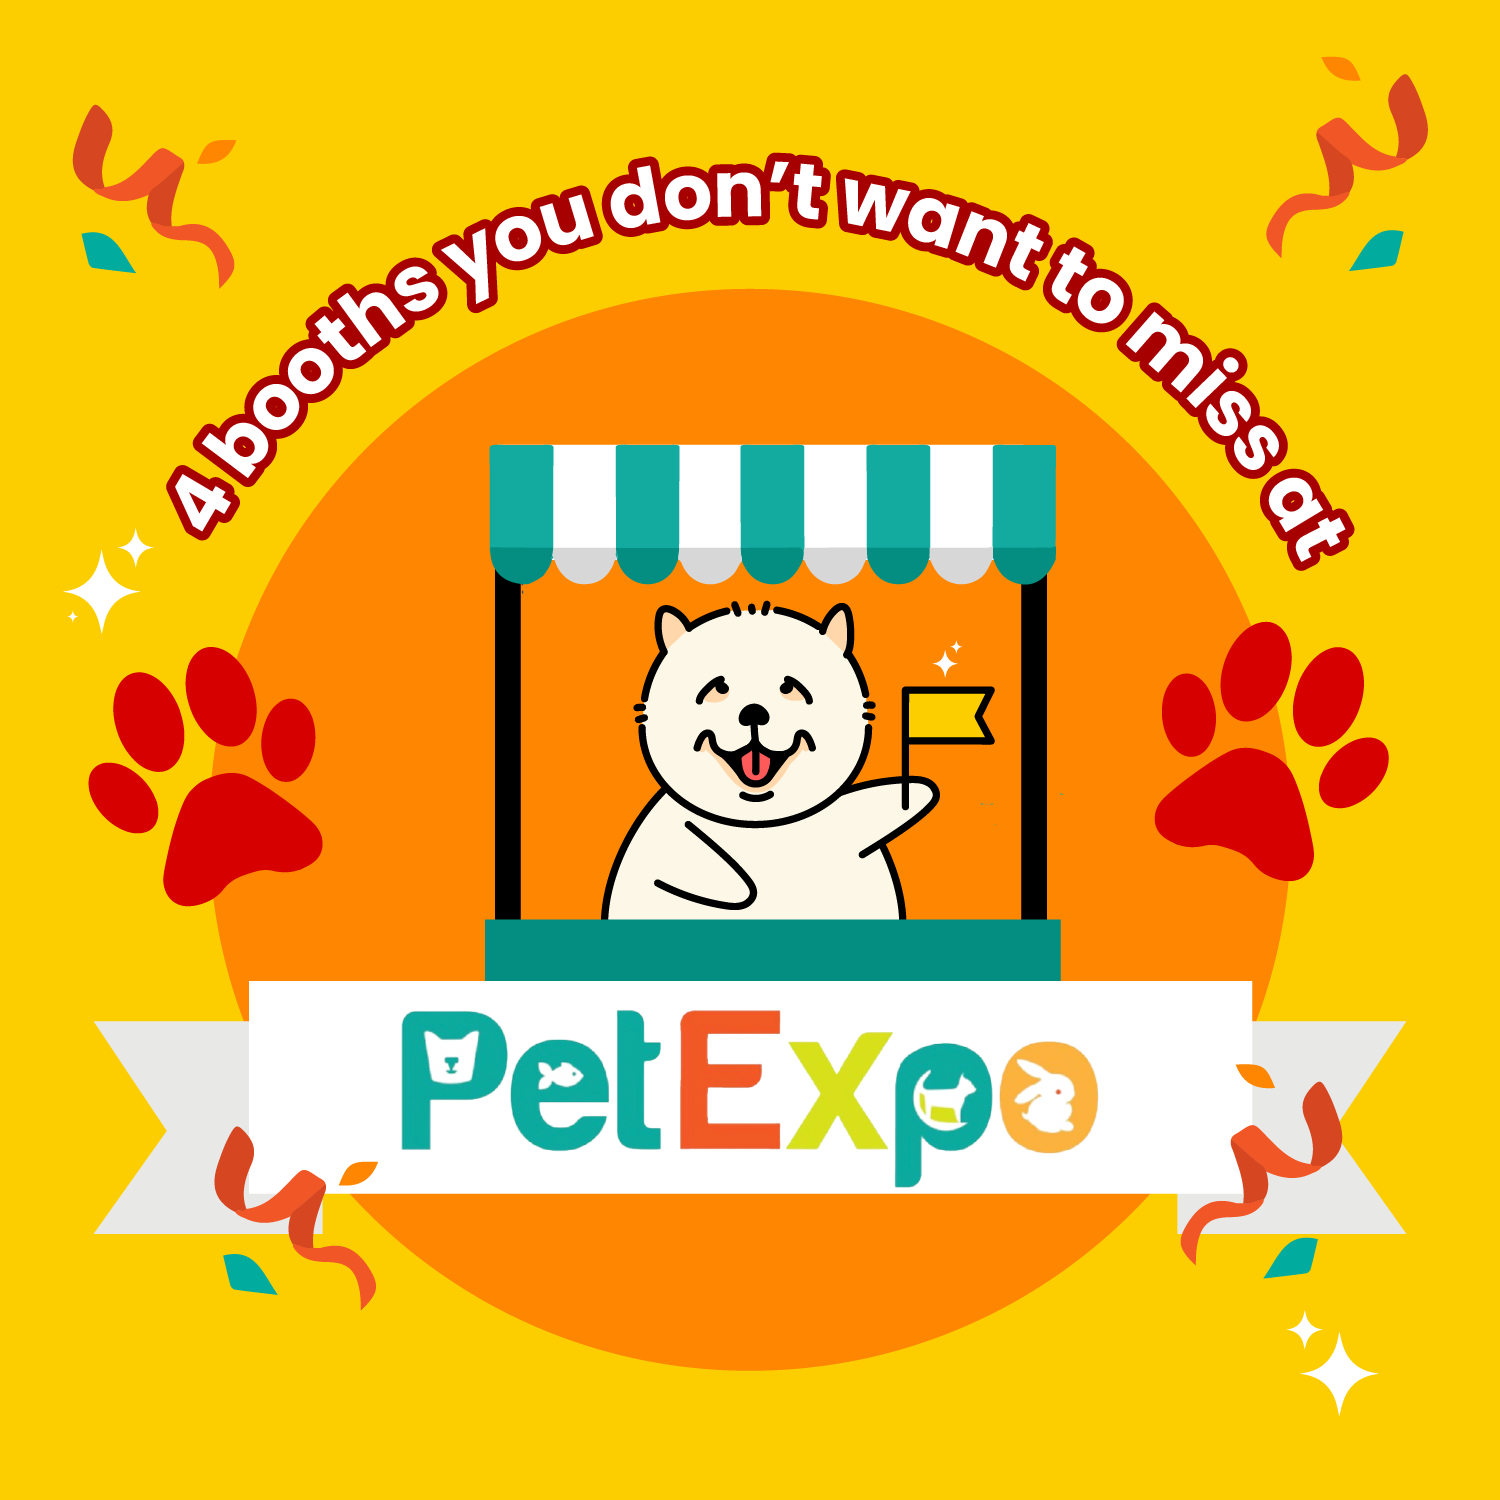 4 booths you don’t want to miss at Pet Expo 2022!